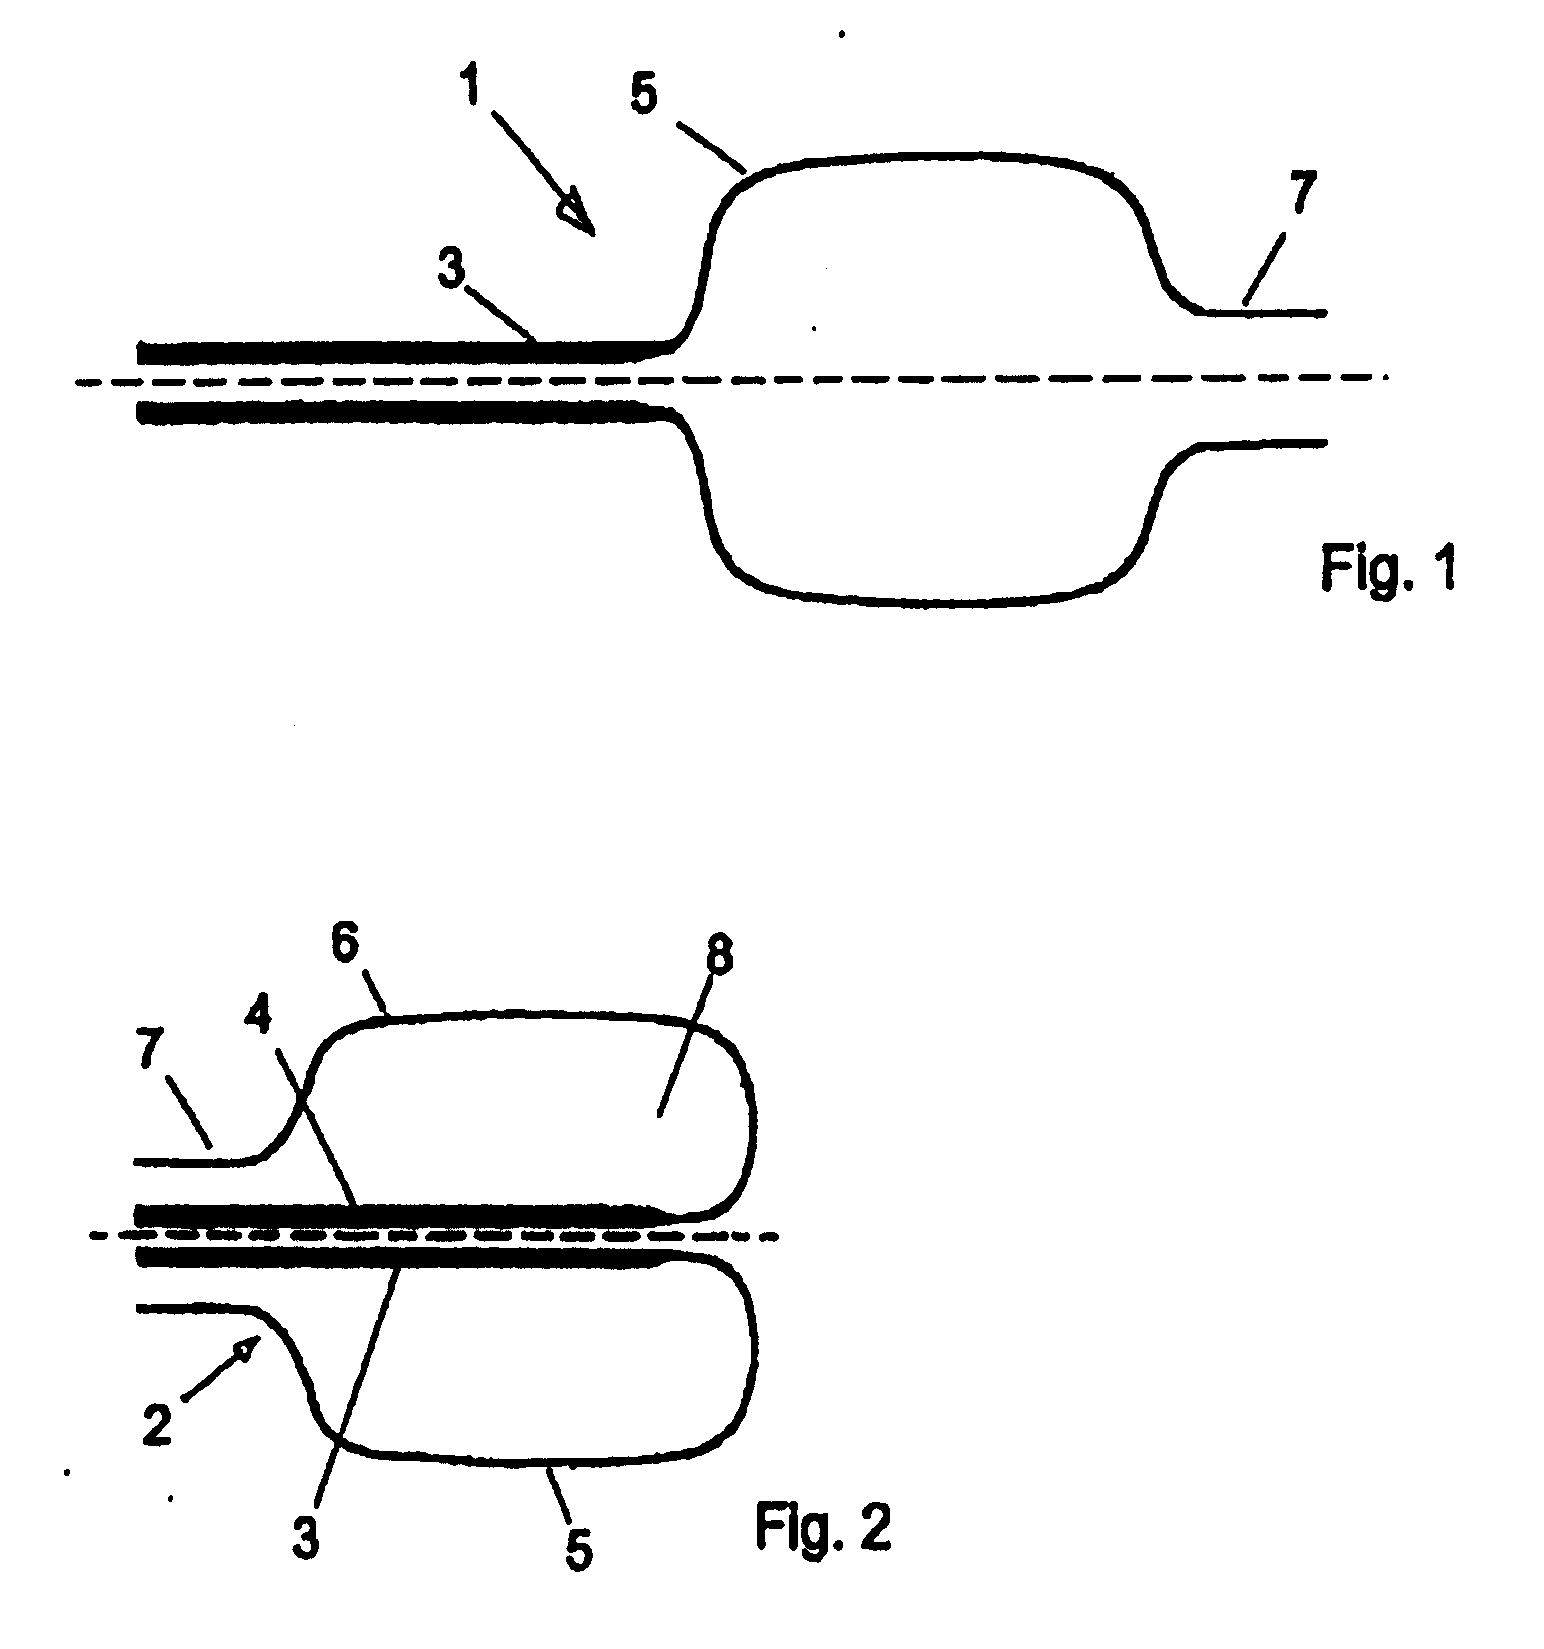 Device to be used in healing processes